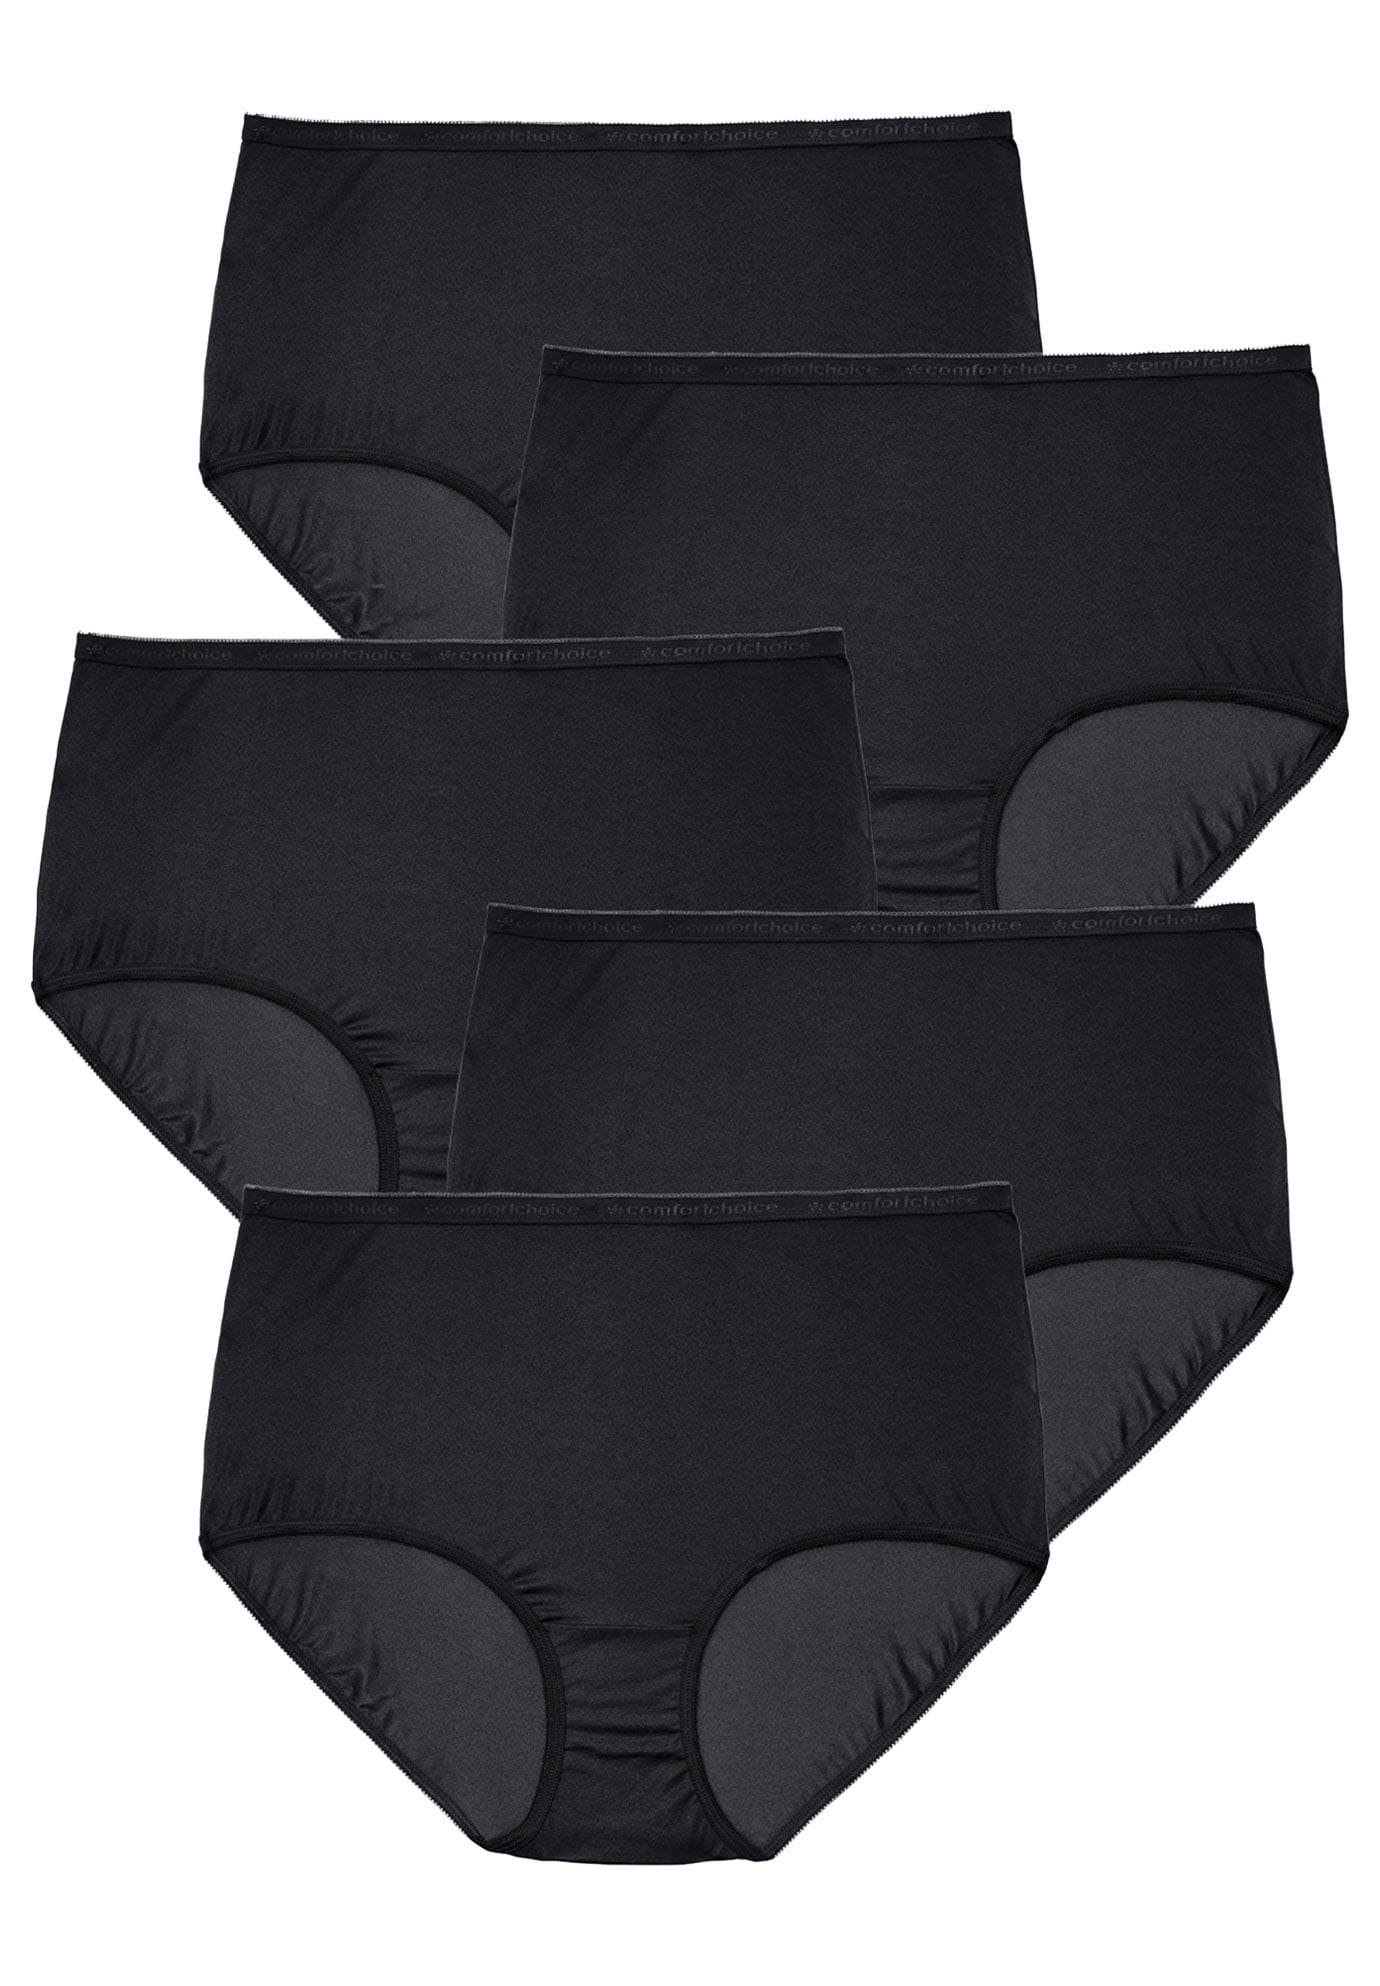 Plus Size Women's Nylon Brief 5-Pack by Comfort Choice in Nude Black Pack  (Size 9) Underwear - Yahoo Shopping